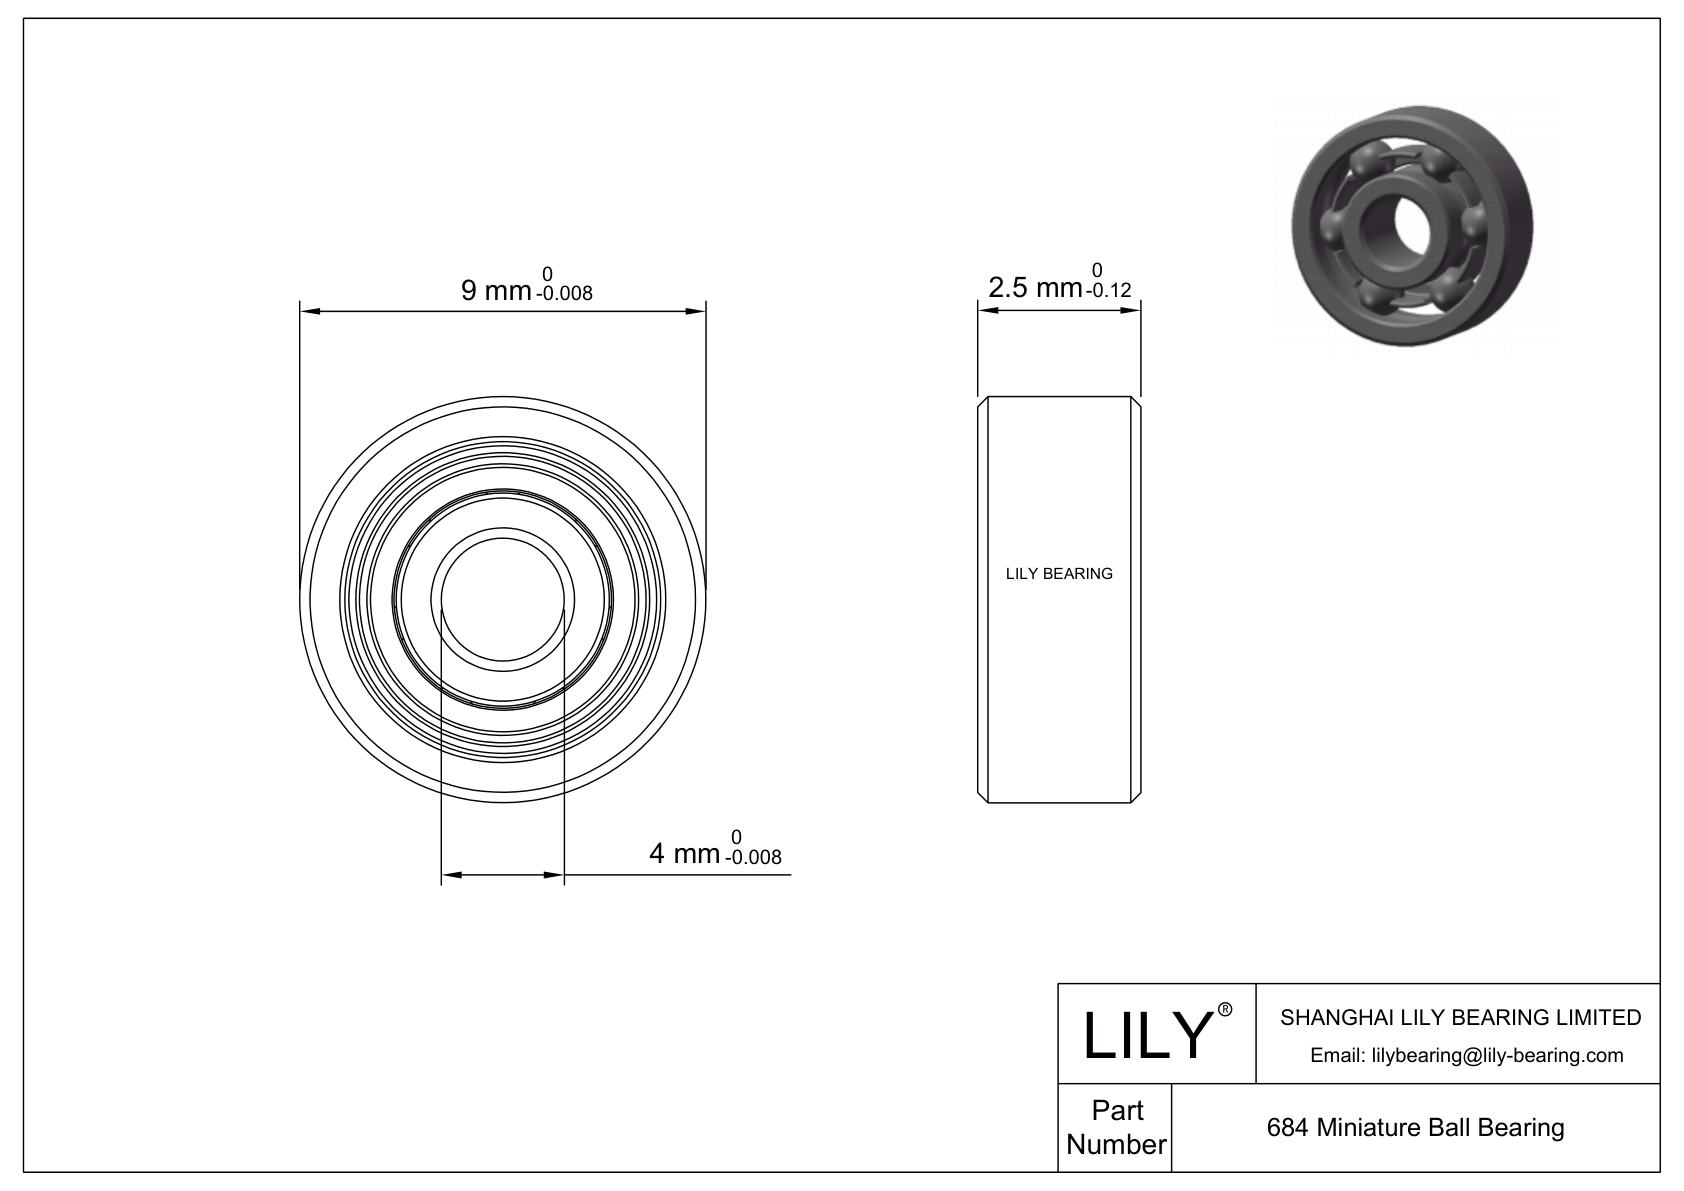 LILY-BS68412-6 POM Coated Bearing cad drawing